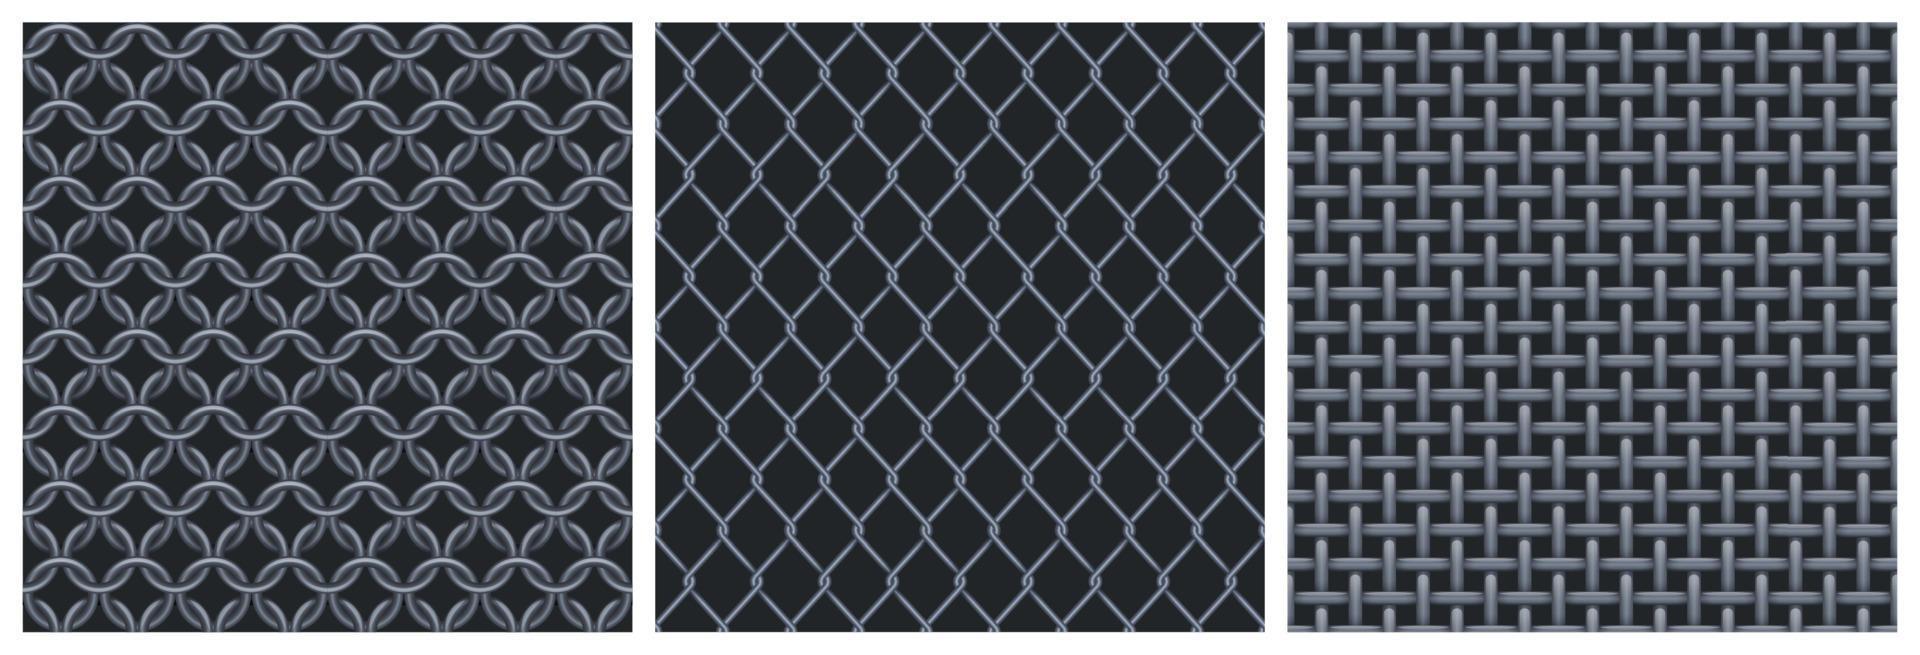 https://static.vecteezy.com/system/resources/previews/013/834/202/non_2x/metal-net-steel-mesh-texture-seamless-patterns-free-vector.jpg